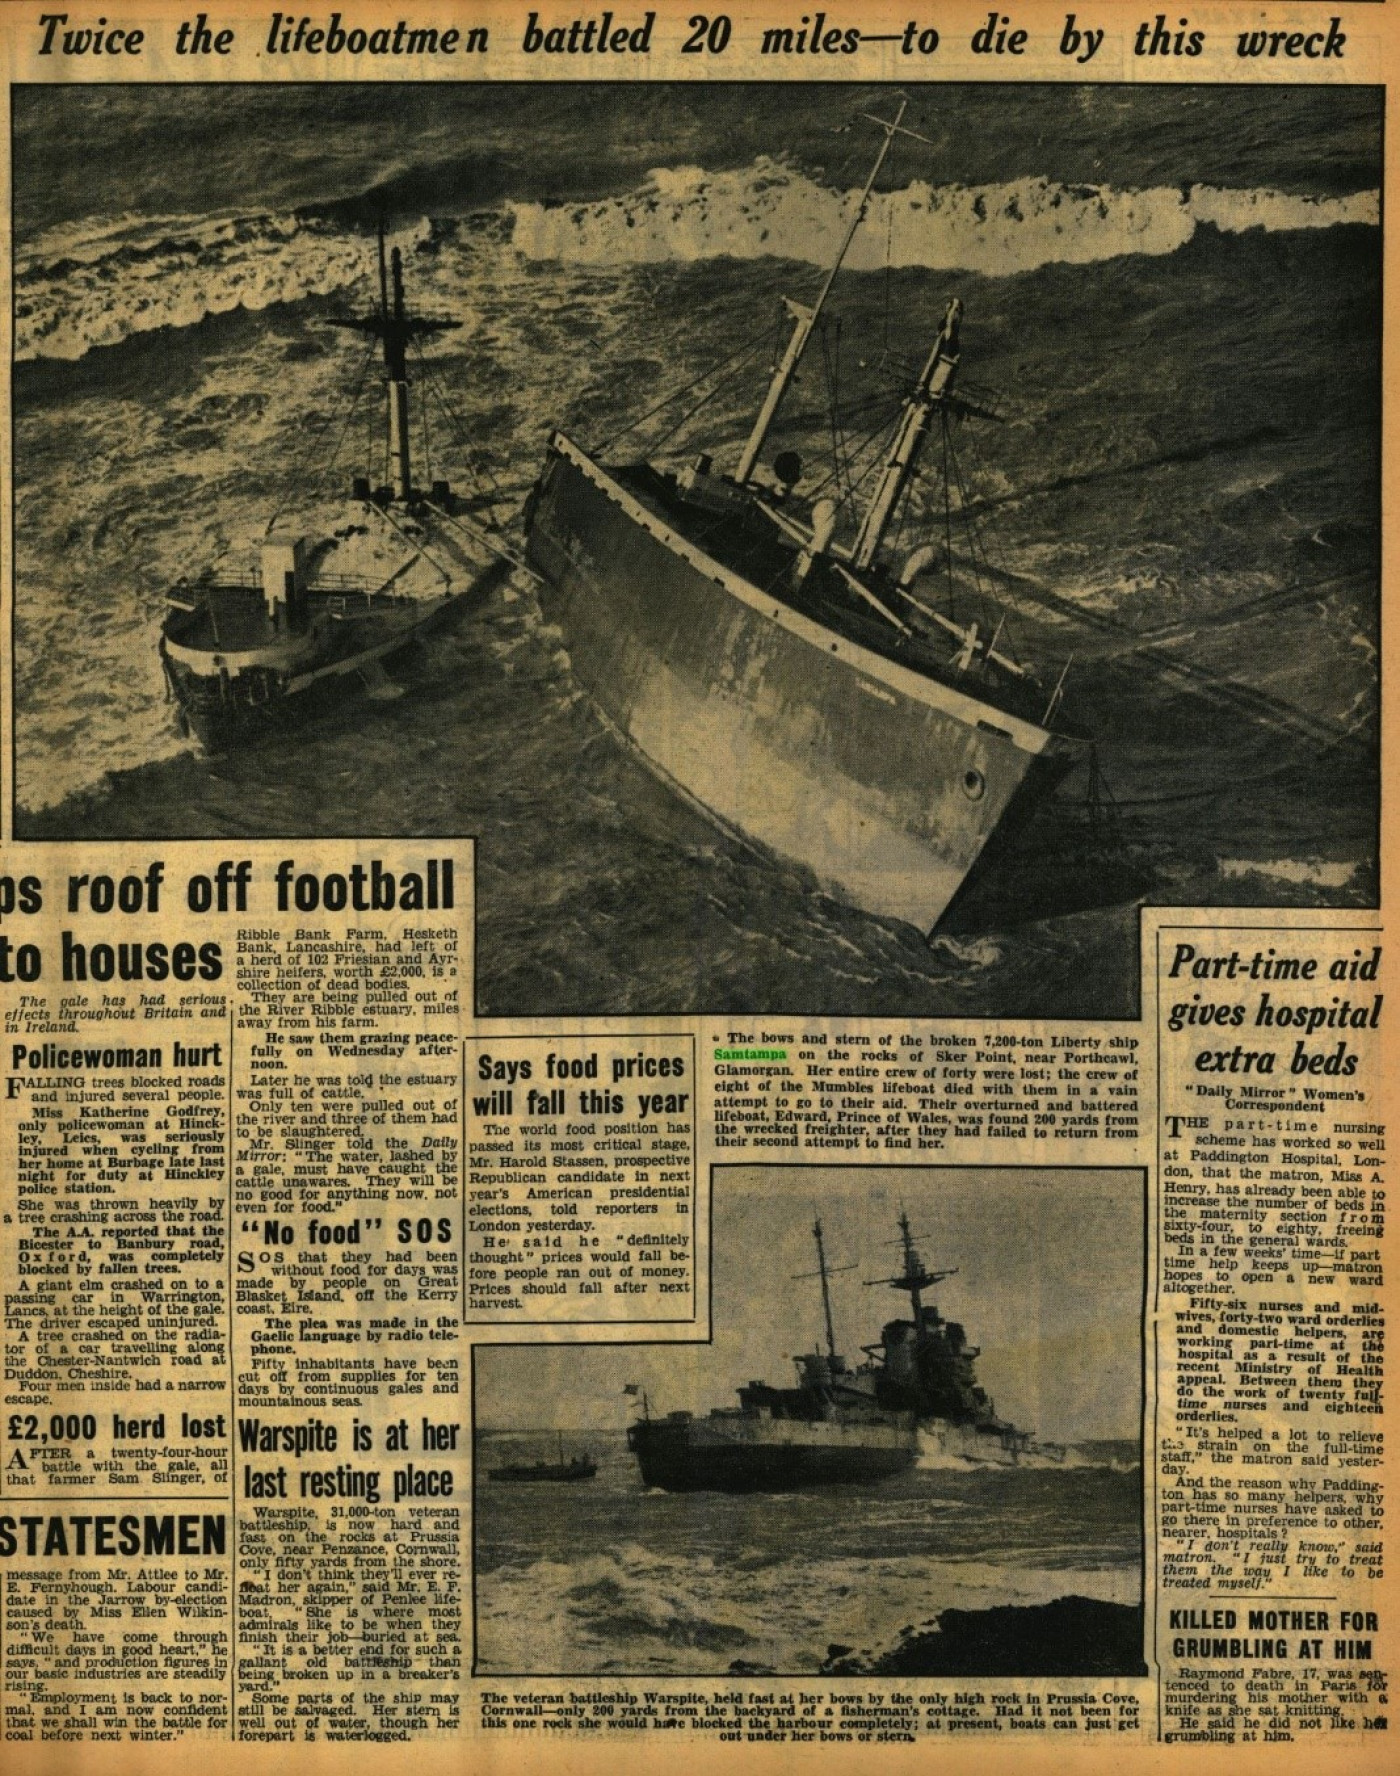 Daily Mirror reporting the wreck of the Samtampa